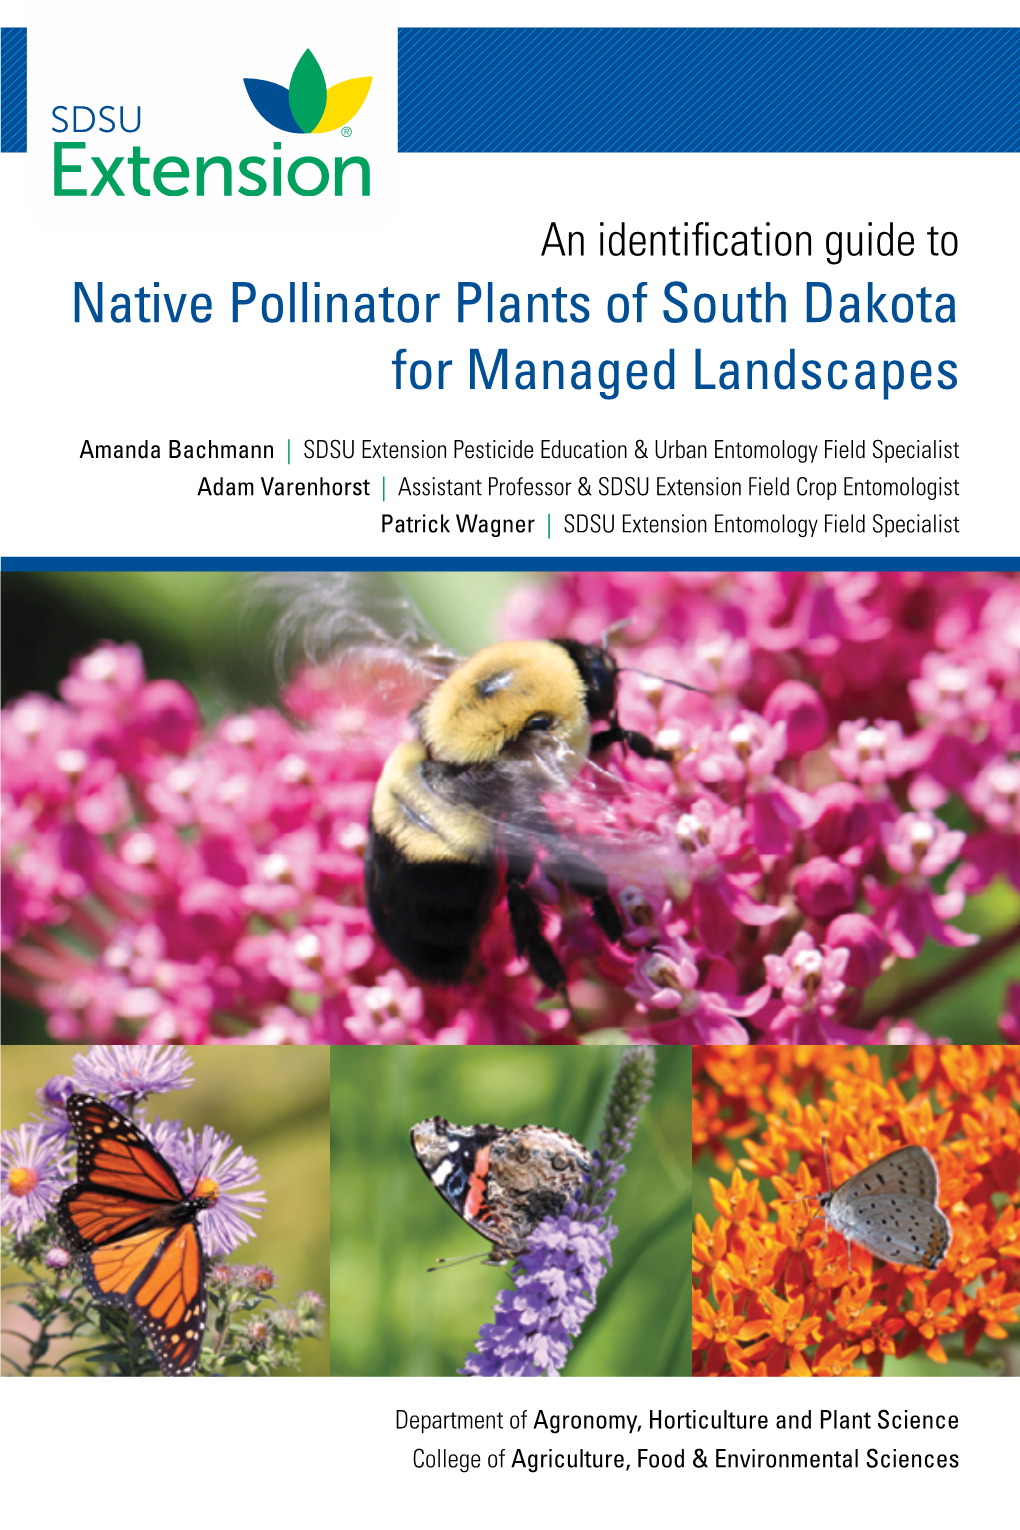 An Identification Guide to Native Pollinator Plants in South Dakota